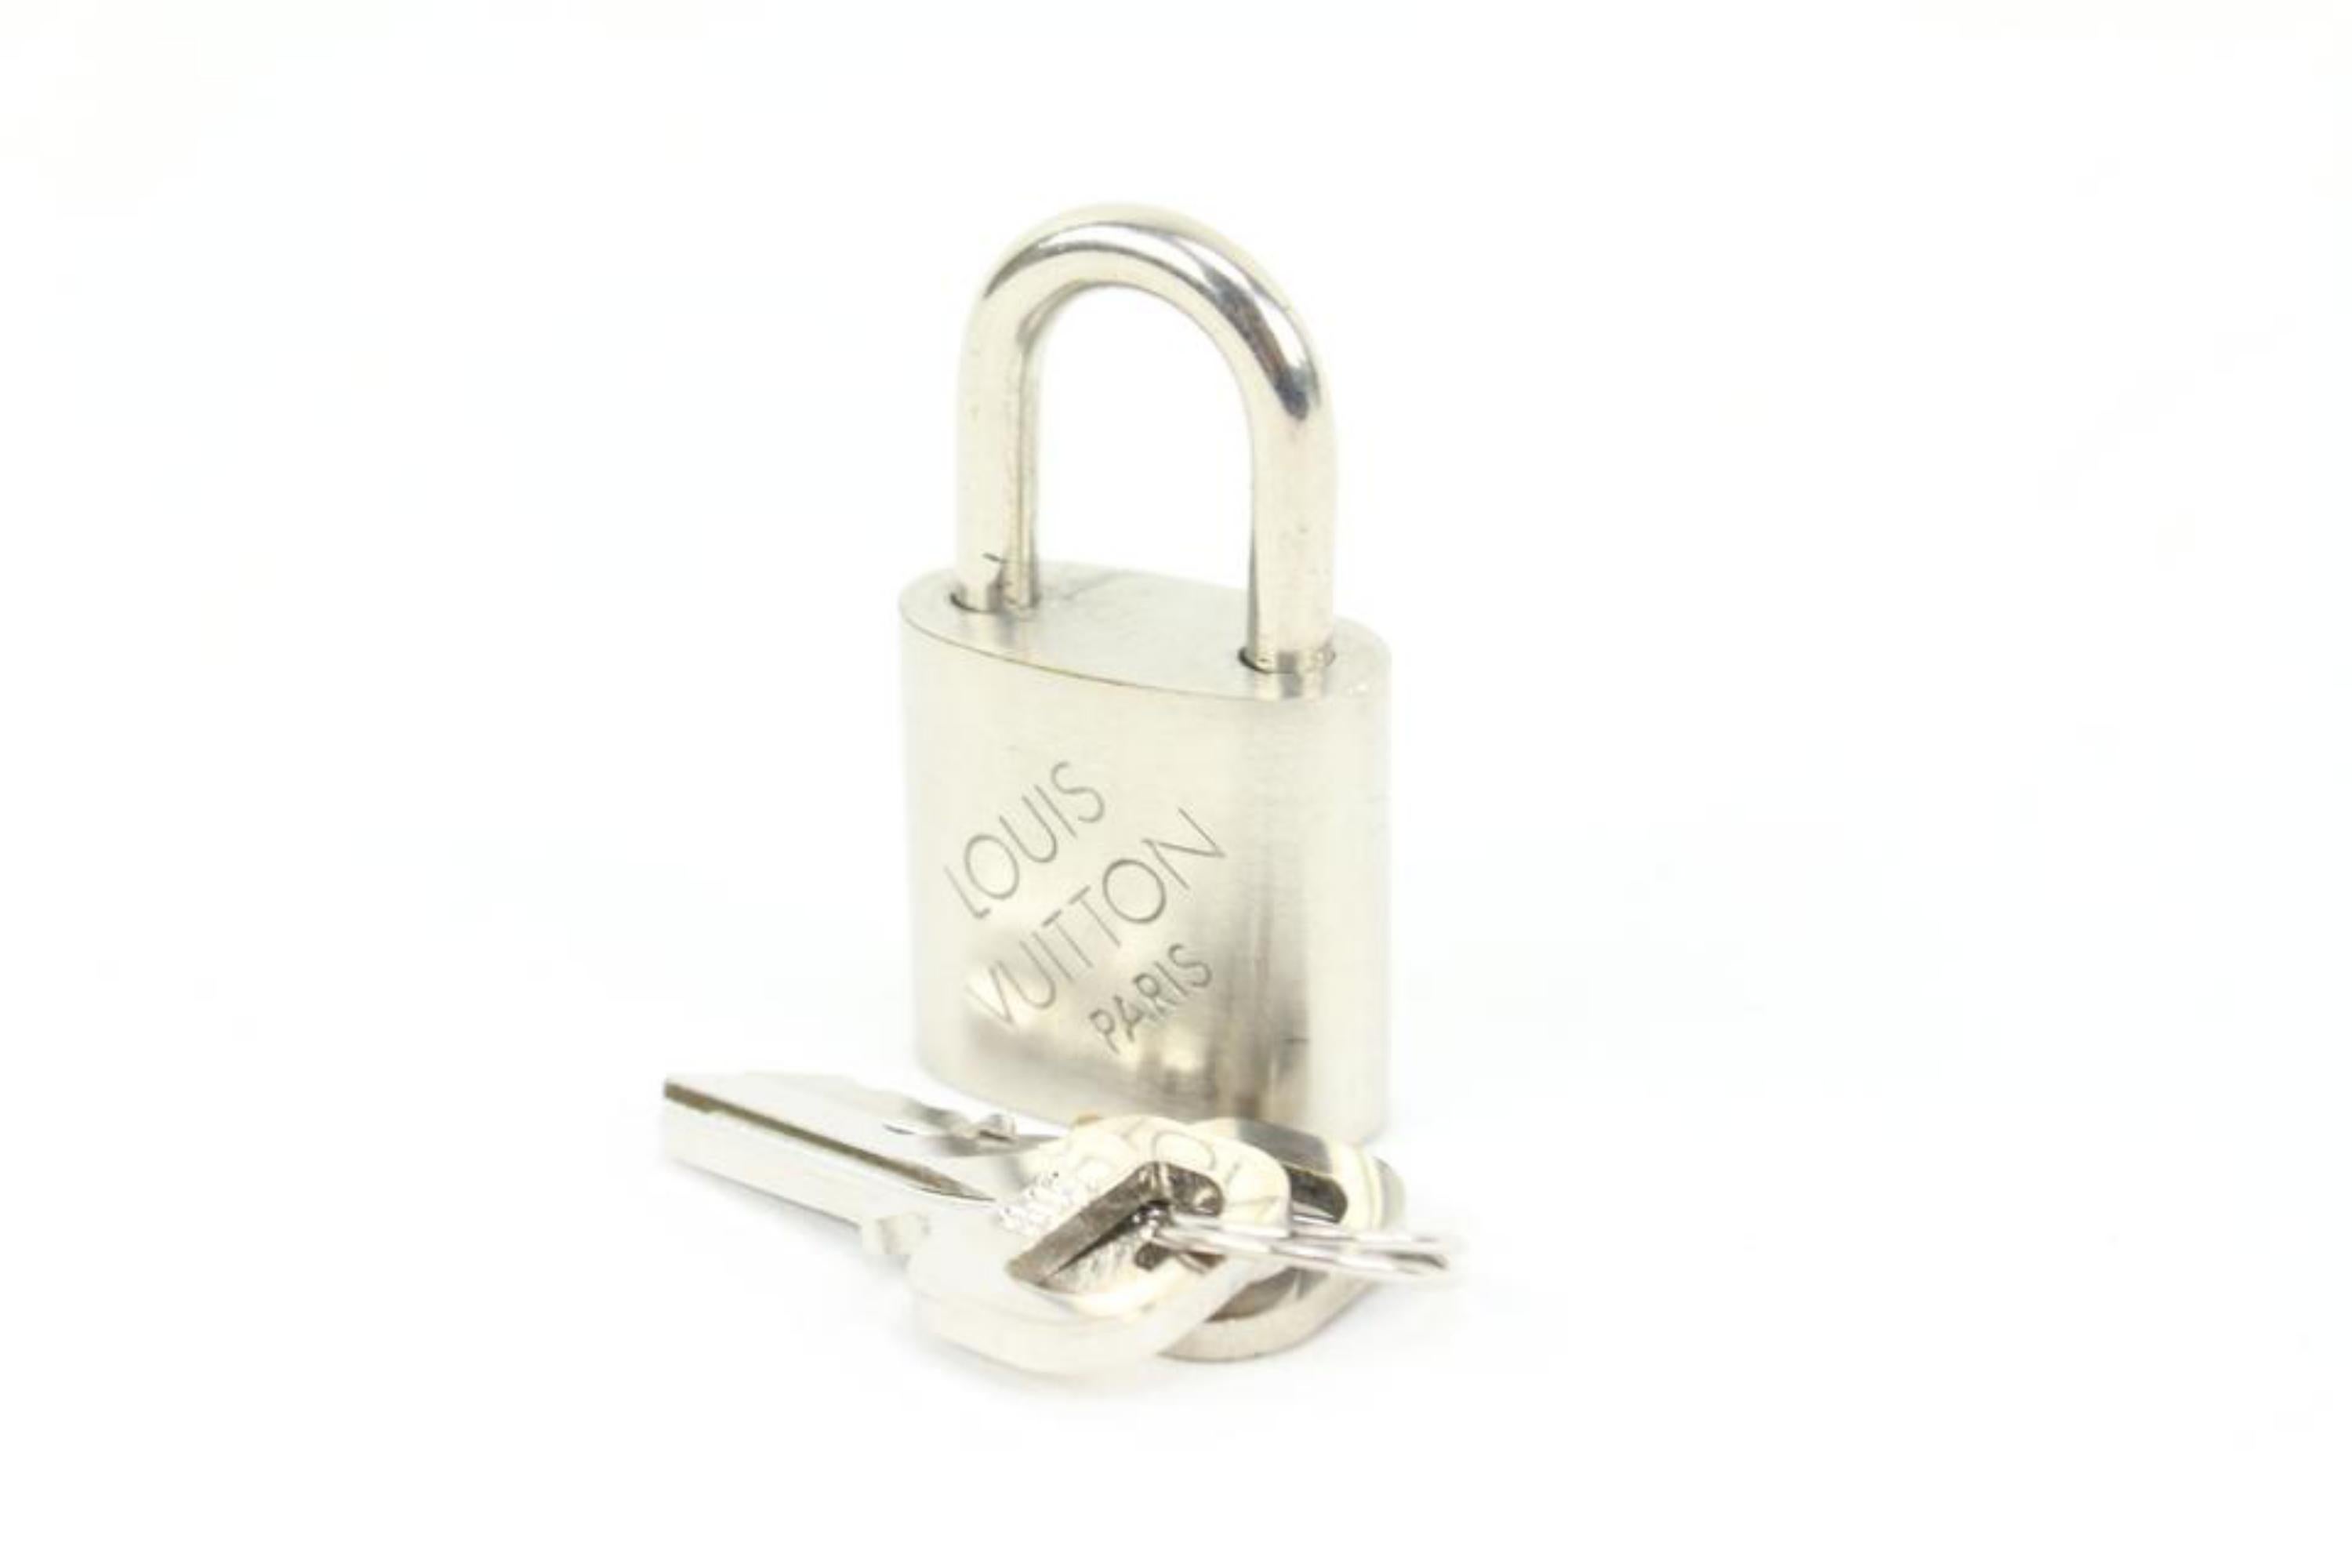 Louis Vuitton Limited Silver Padlock and Keys Set Lock Bag Charm Cadena 2LV34S
Made In: France
Measurements: Length:  1.8